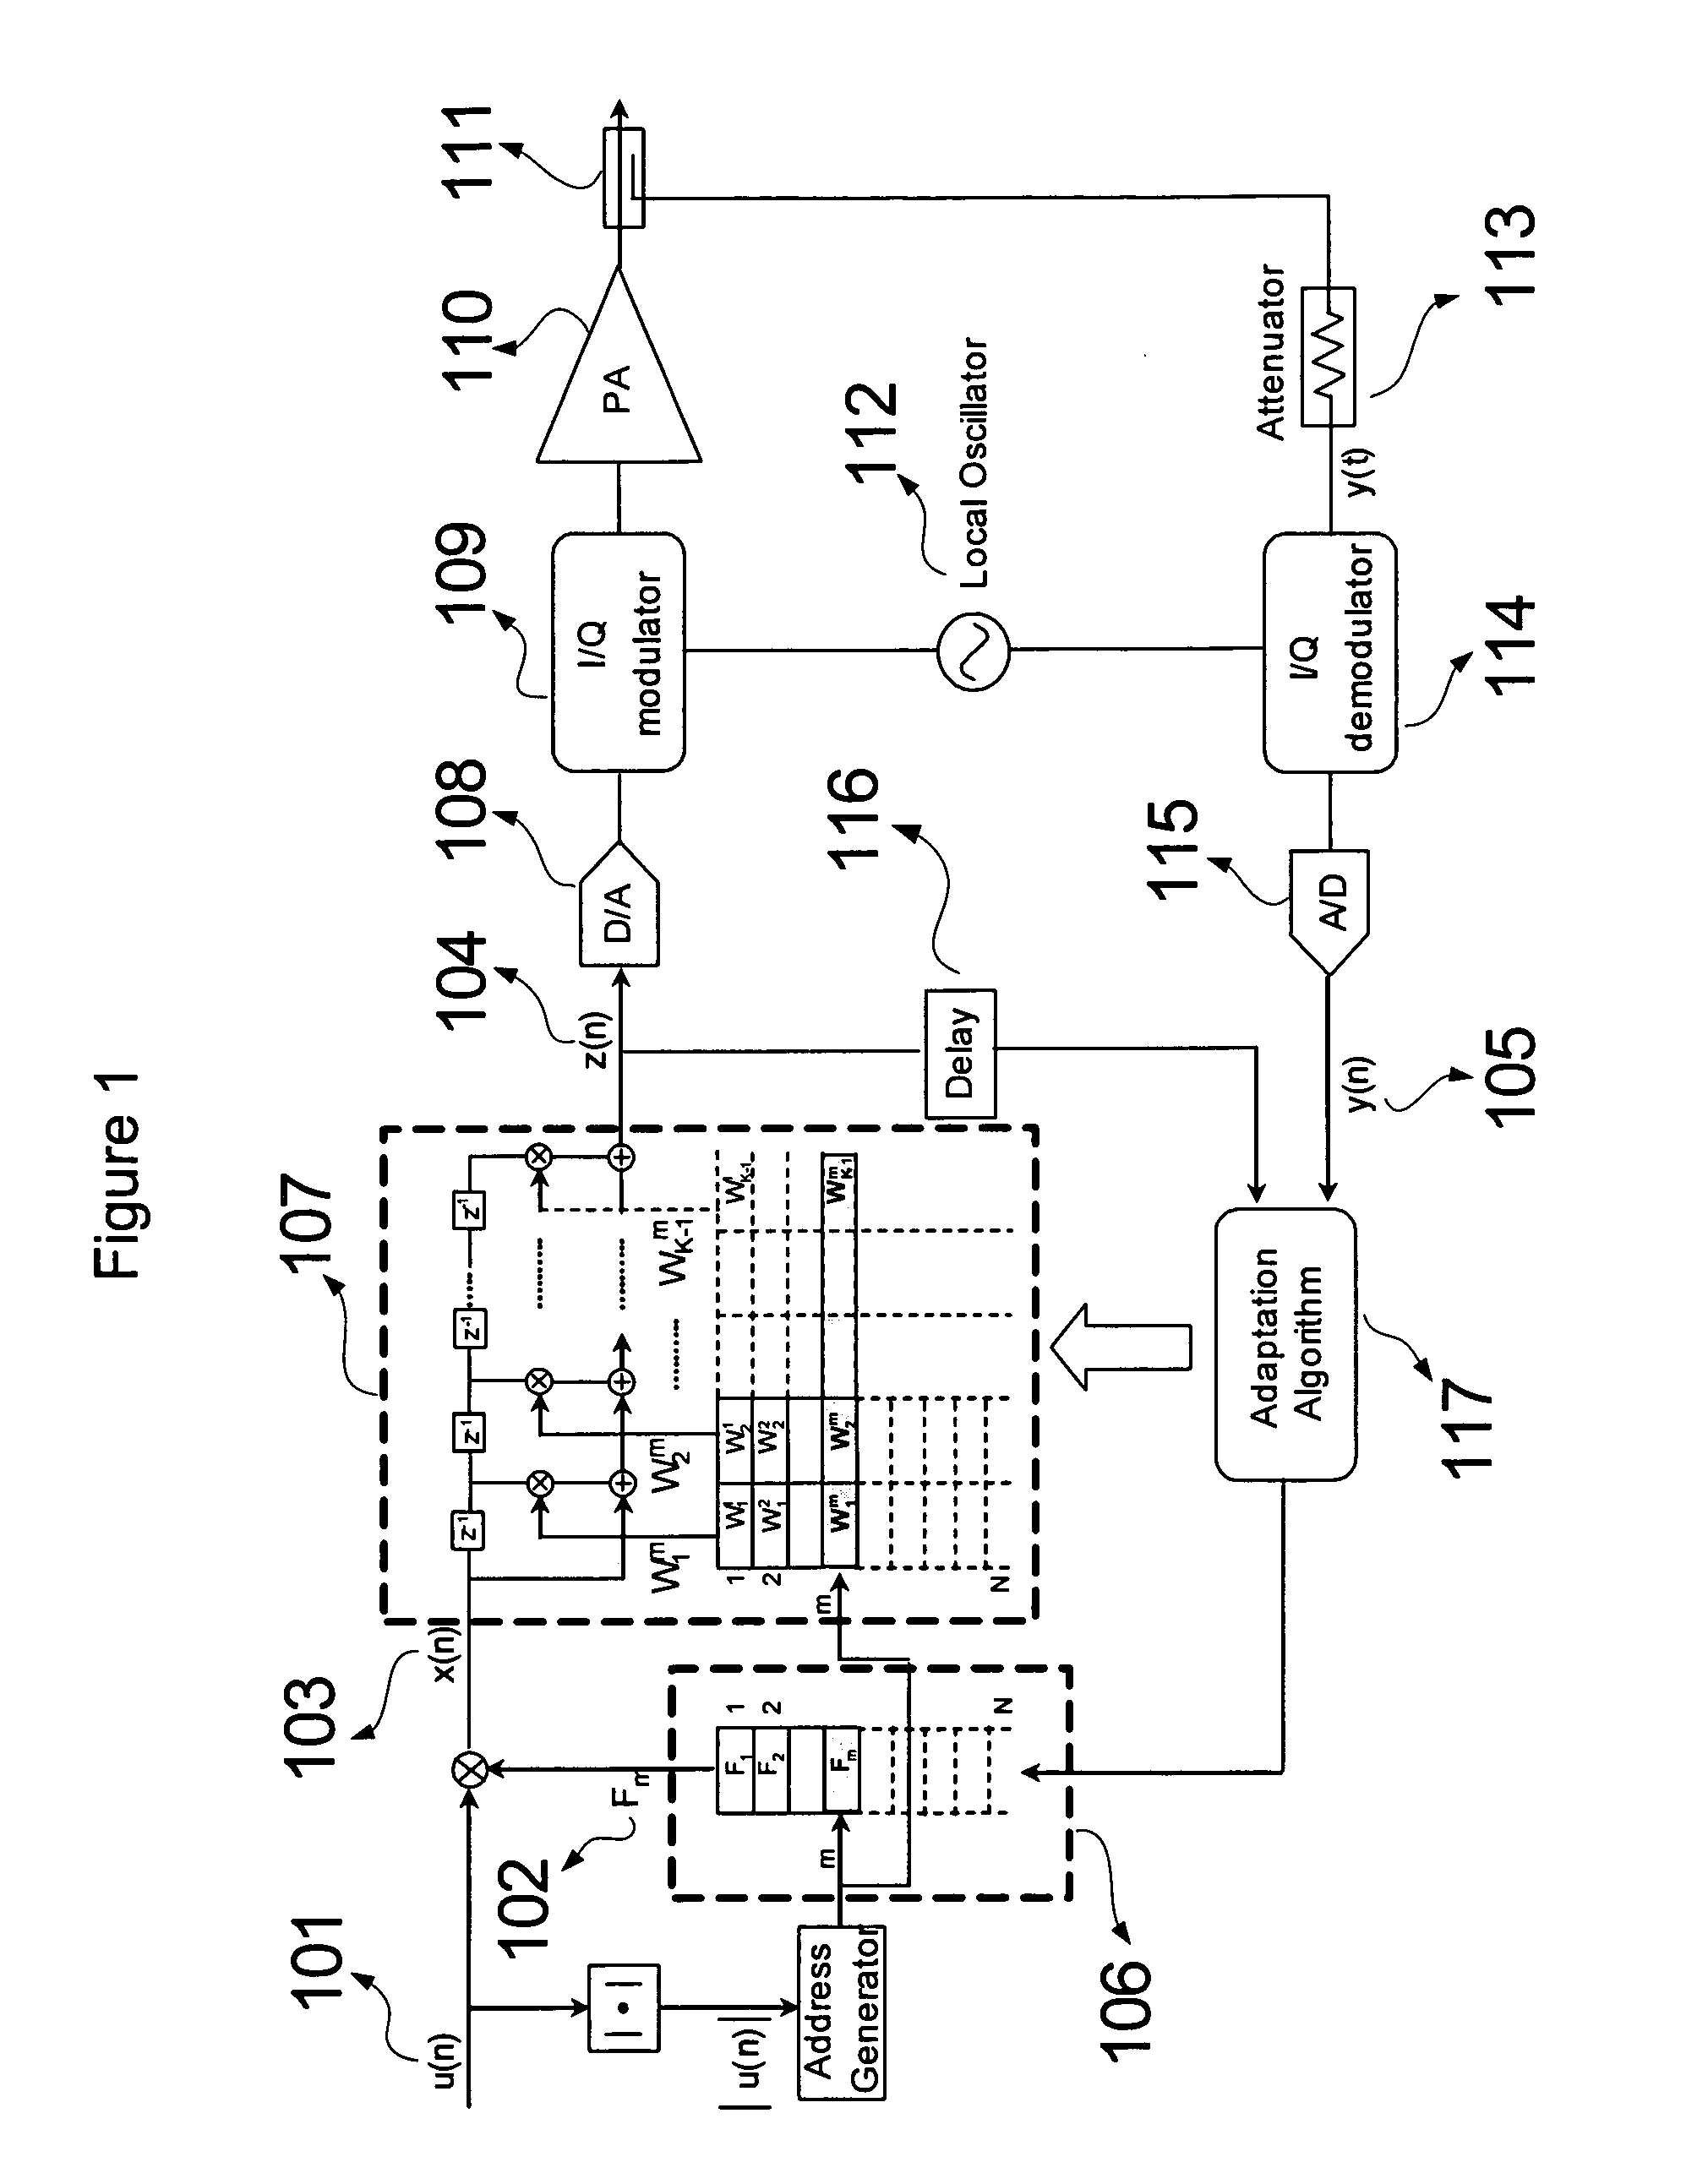 Method and System for Baseband Predistortion Linearization in Multi-Channel Wideband Communication Systems